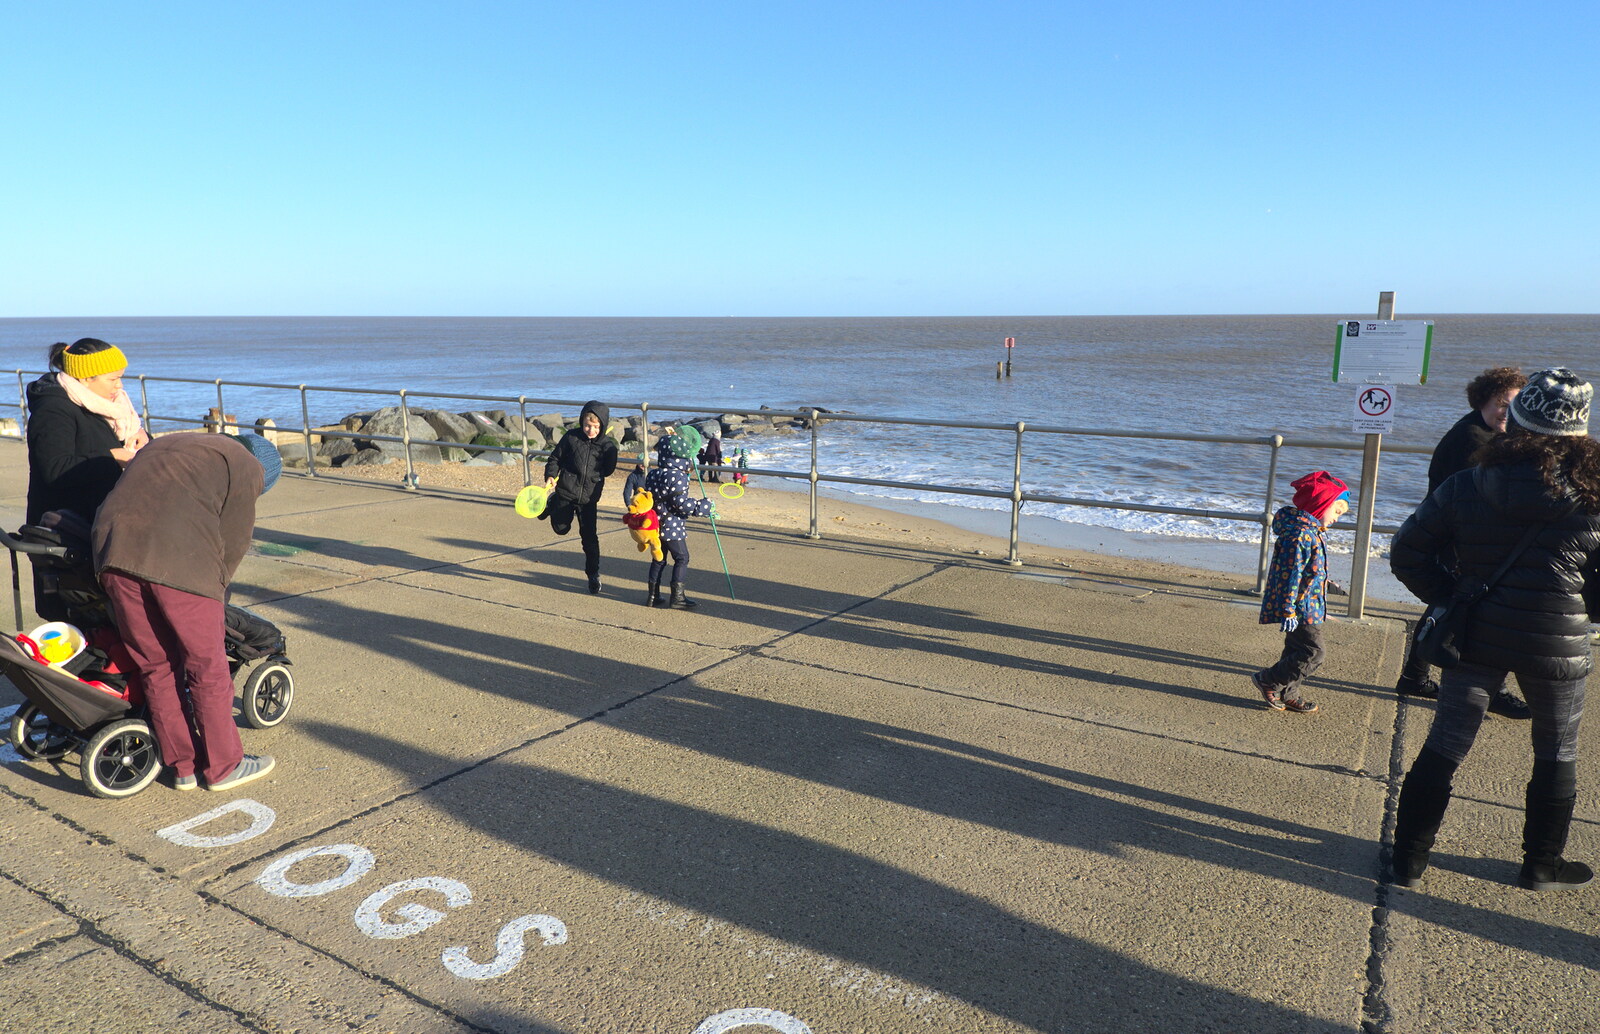 On the prom at Southwold from Boxing Day in Southwold, Suffolk - 26th December 2016